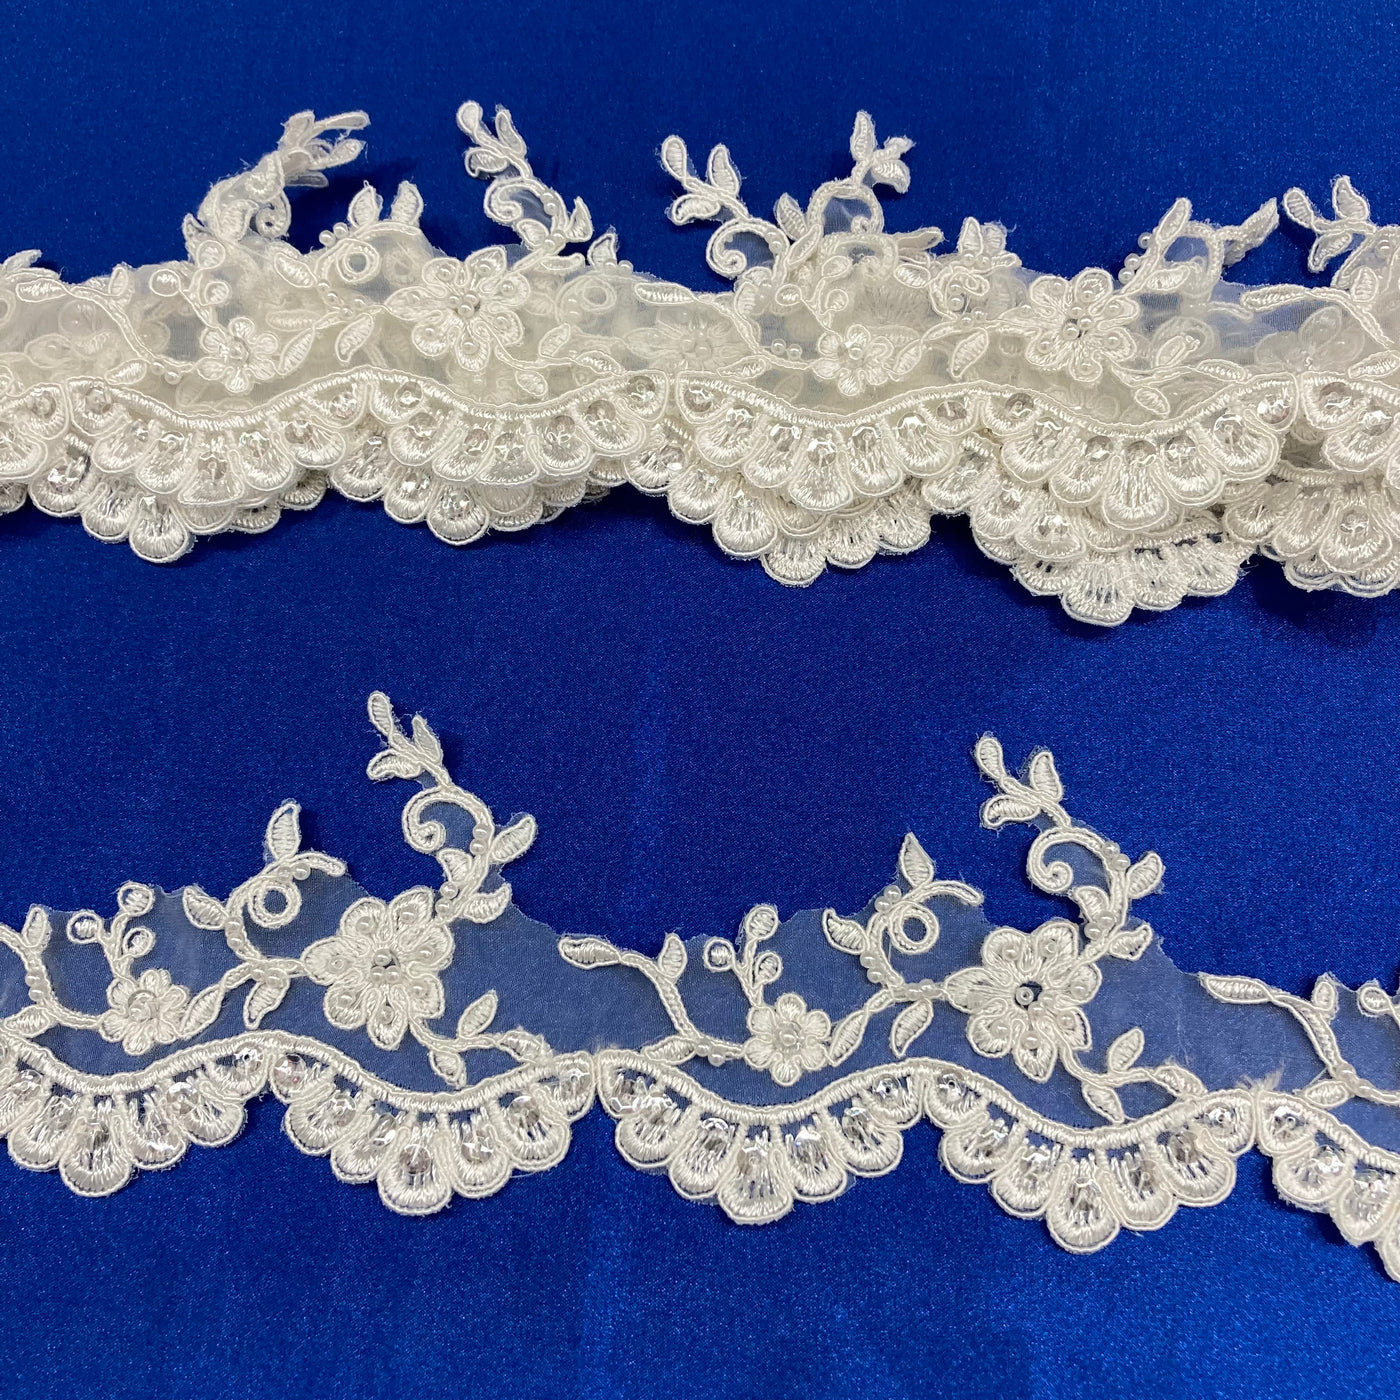 Beaded & Corded Lace Trimming Embroidered on 100% Polyester. Lace Usa